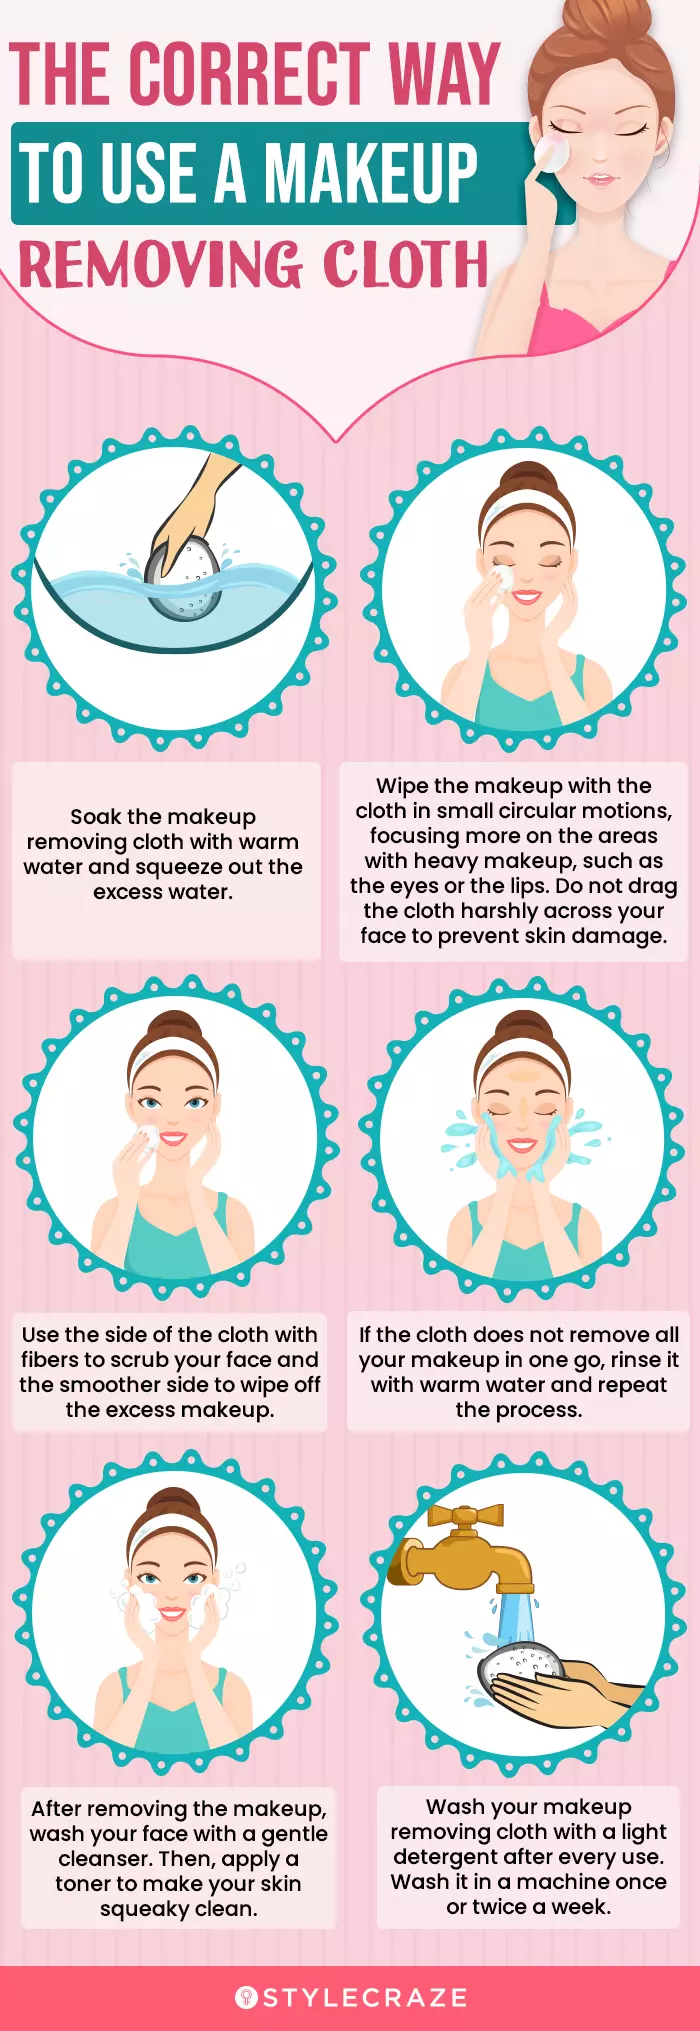 The Correct Way To Use A Makeup Removing Cloth (infographic)